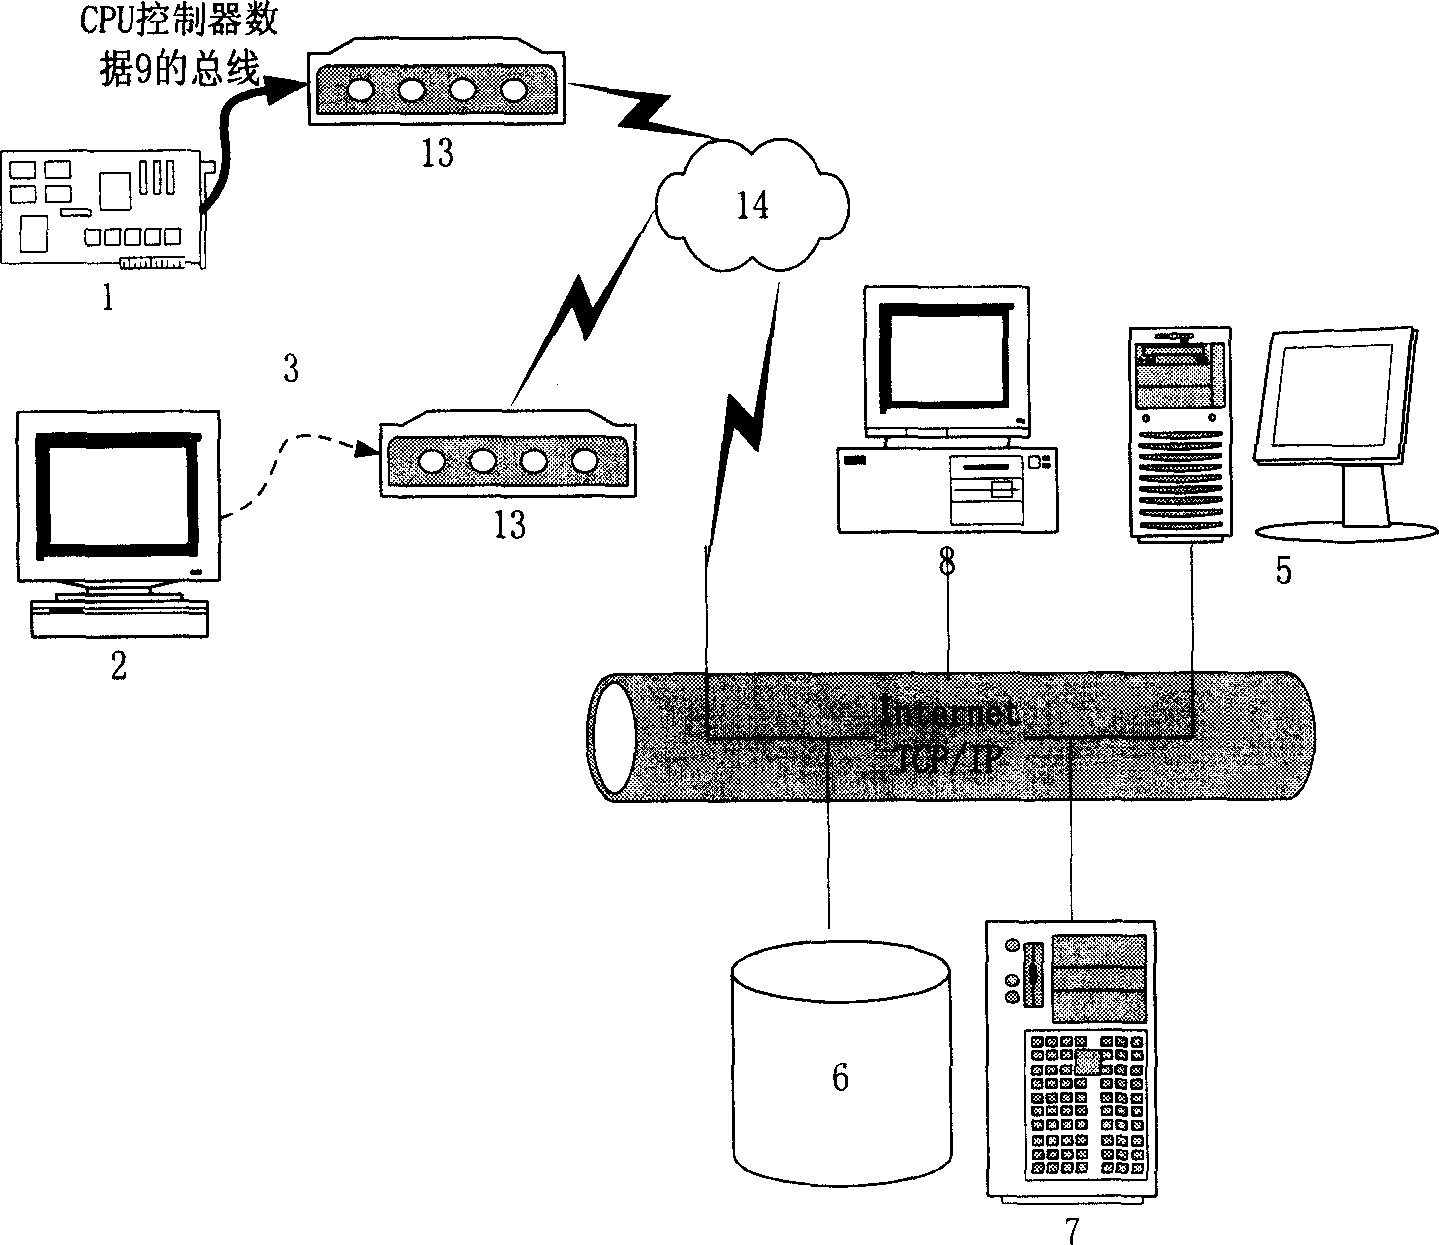 Flexible execution and manufacture system based on radio telecommunication